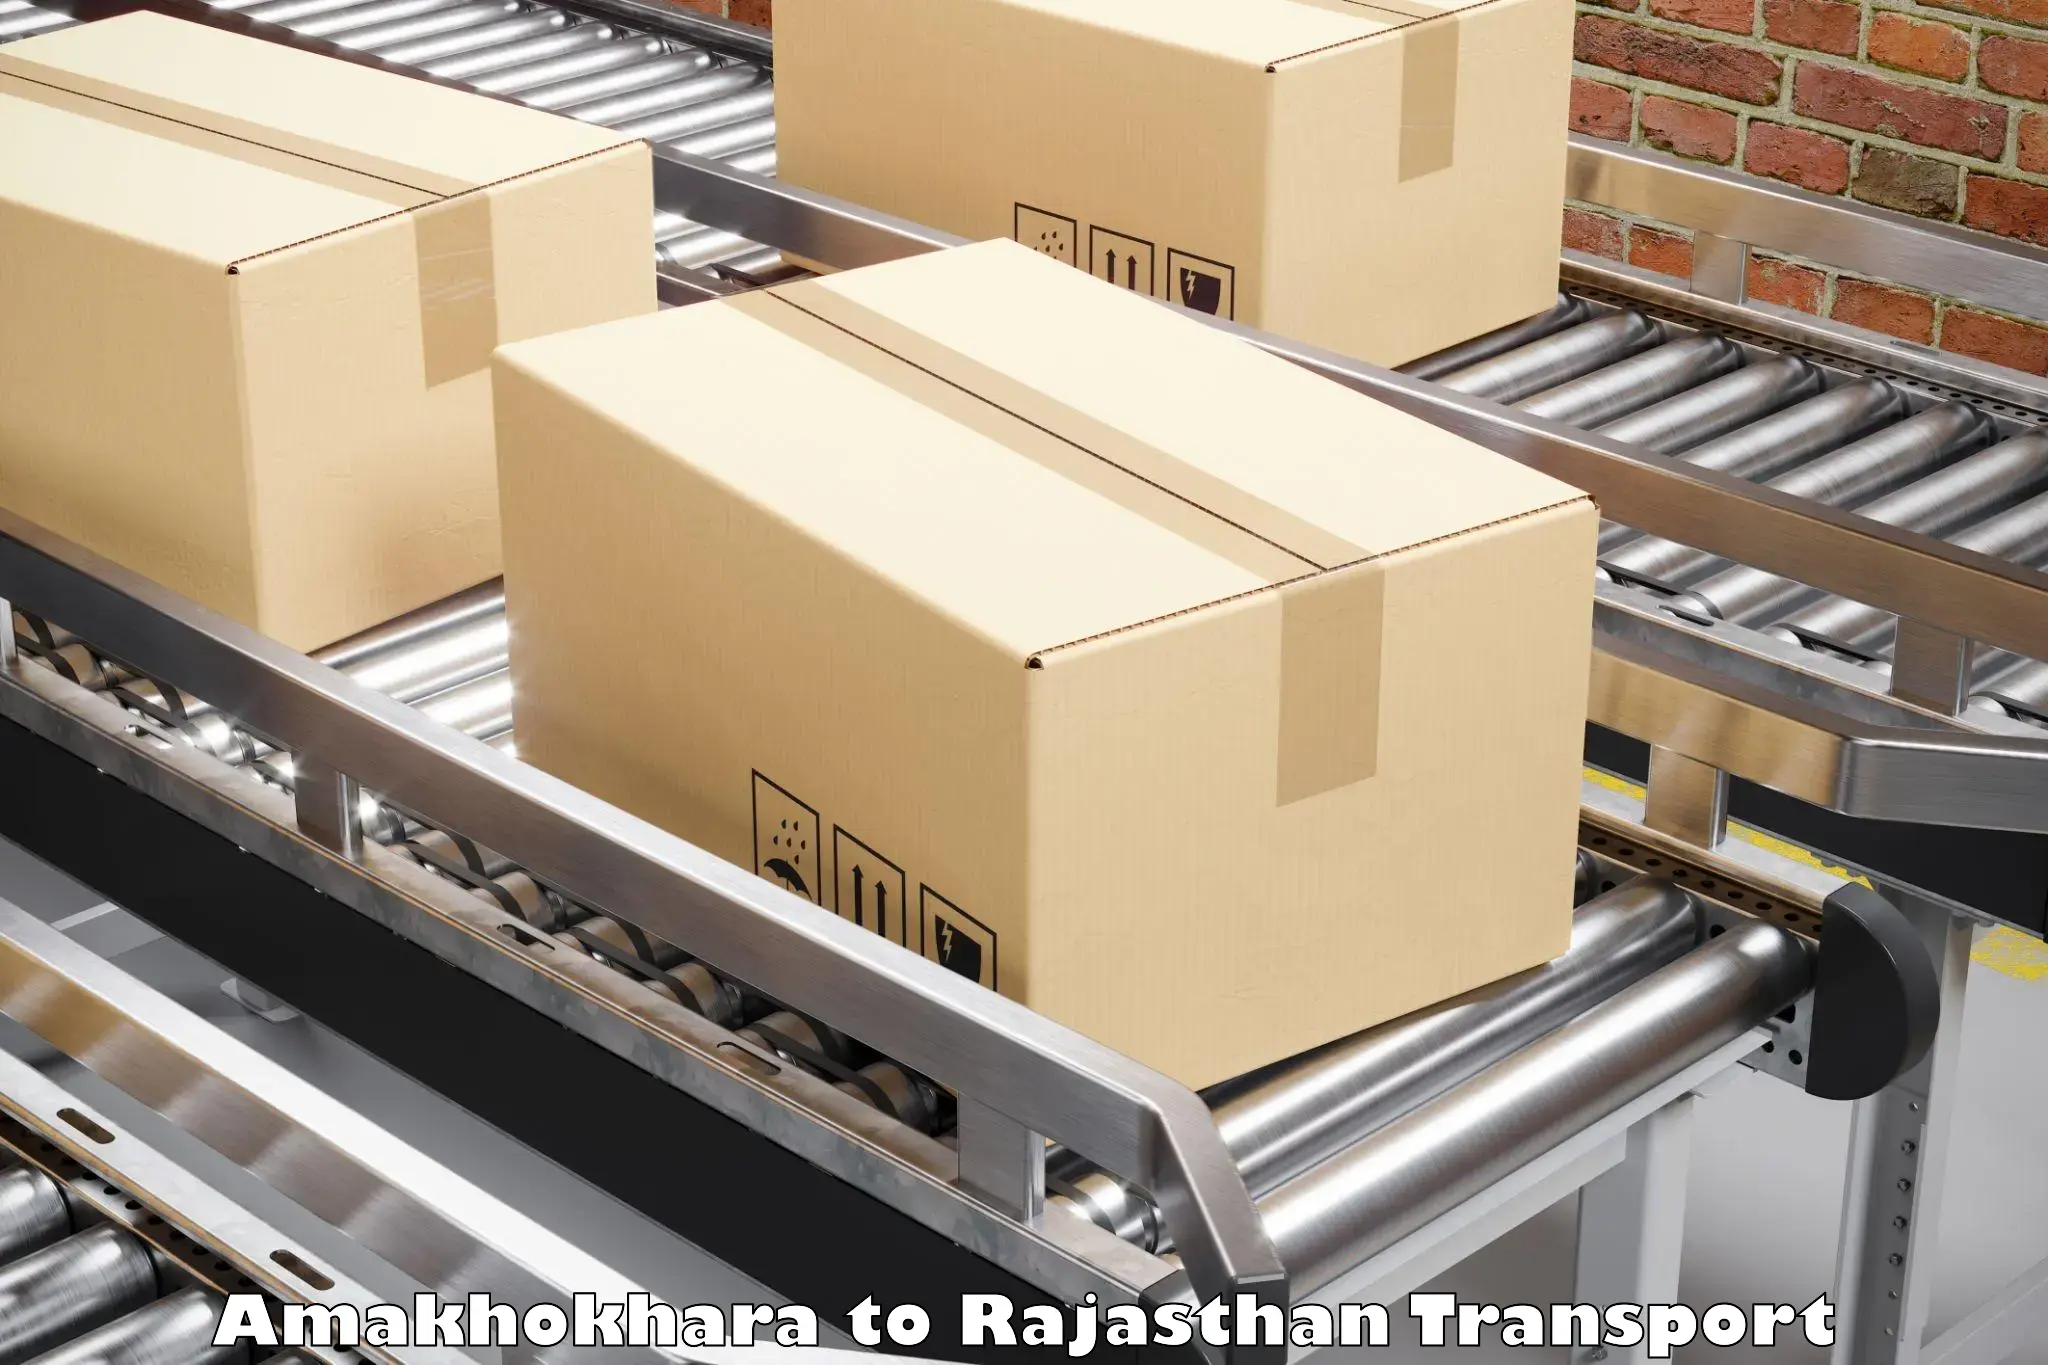 Air cargo transport services Amakhokhara to Rajasthan